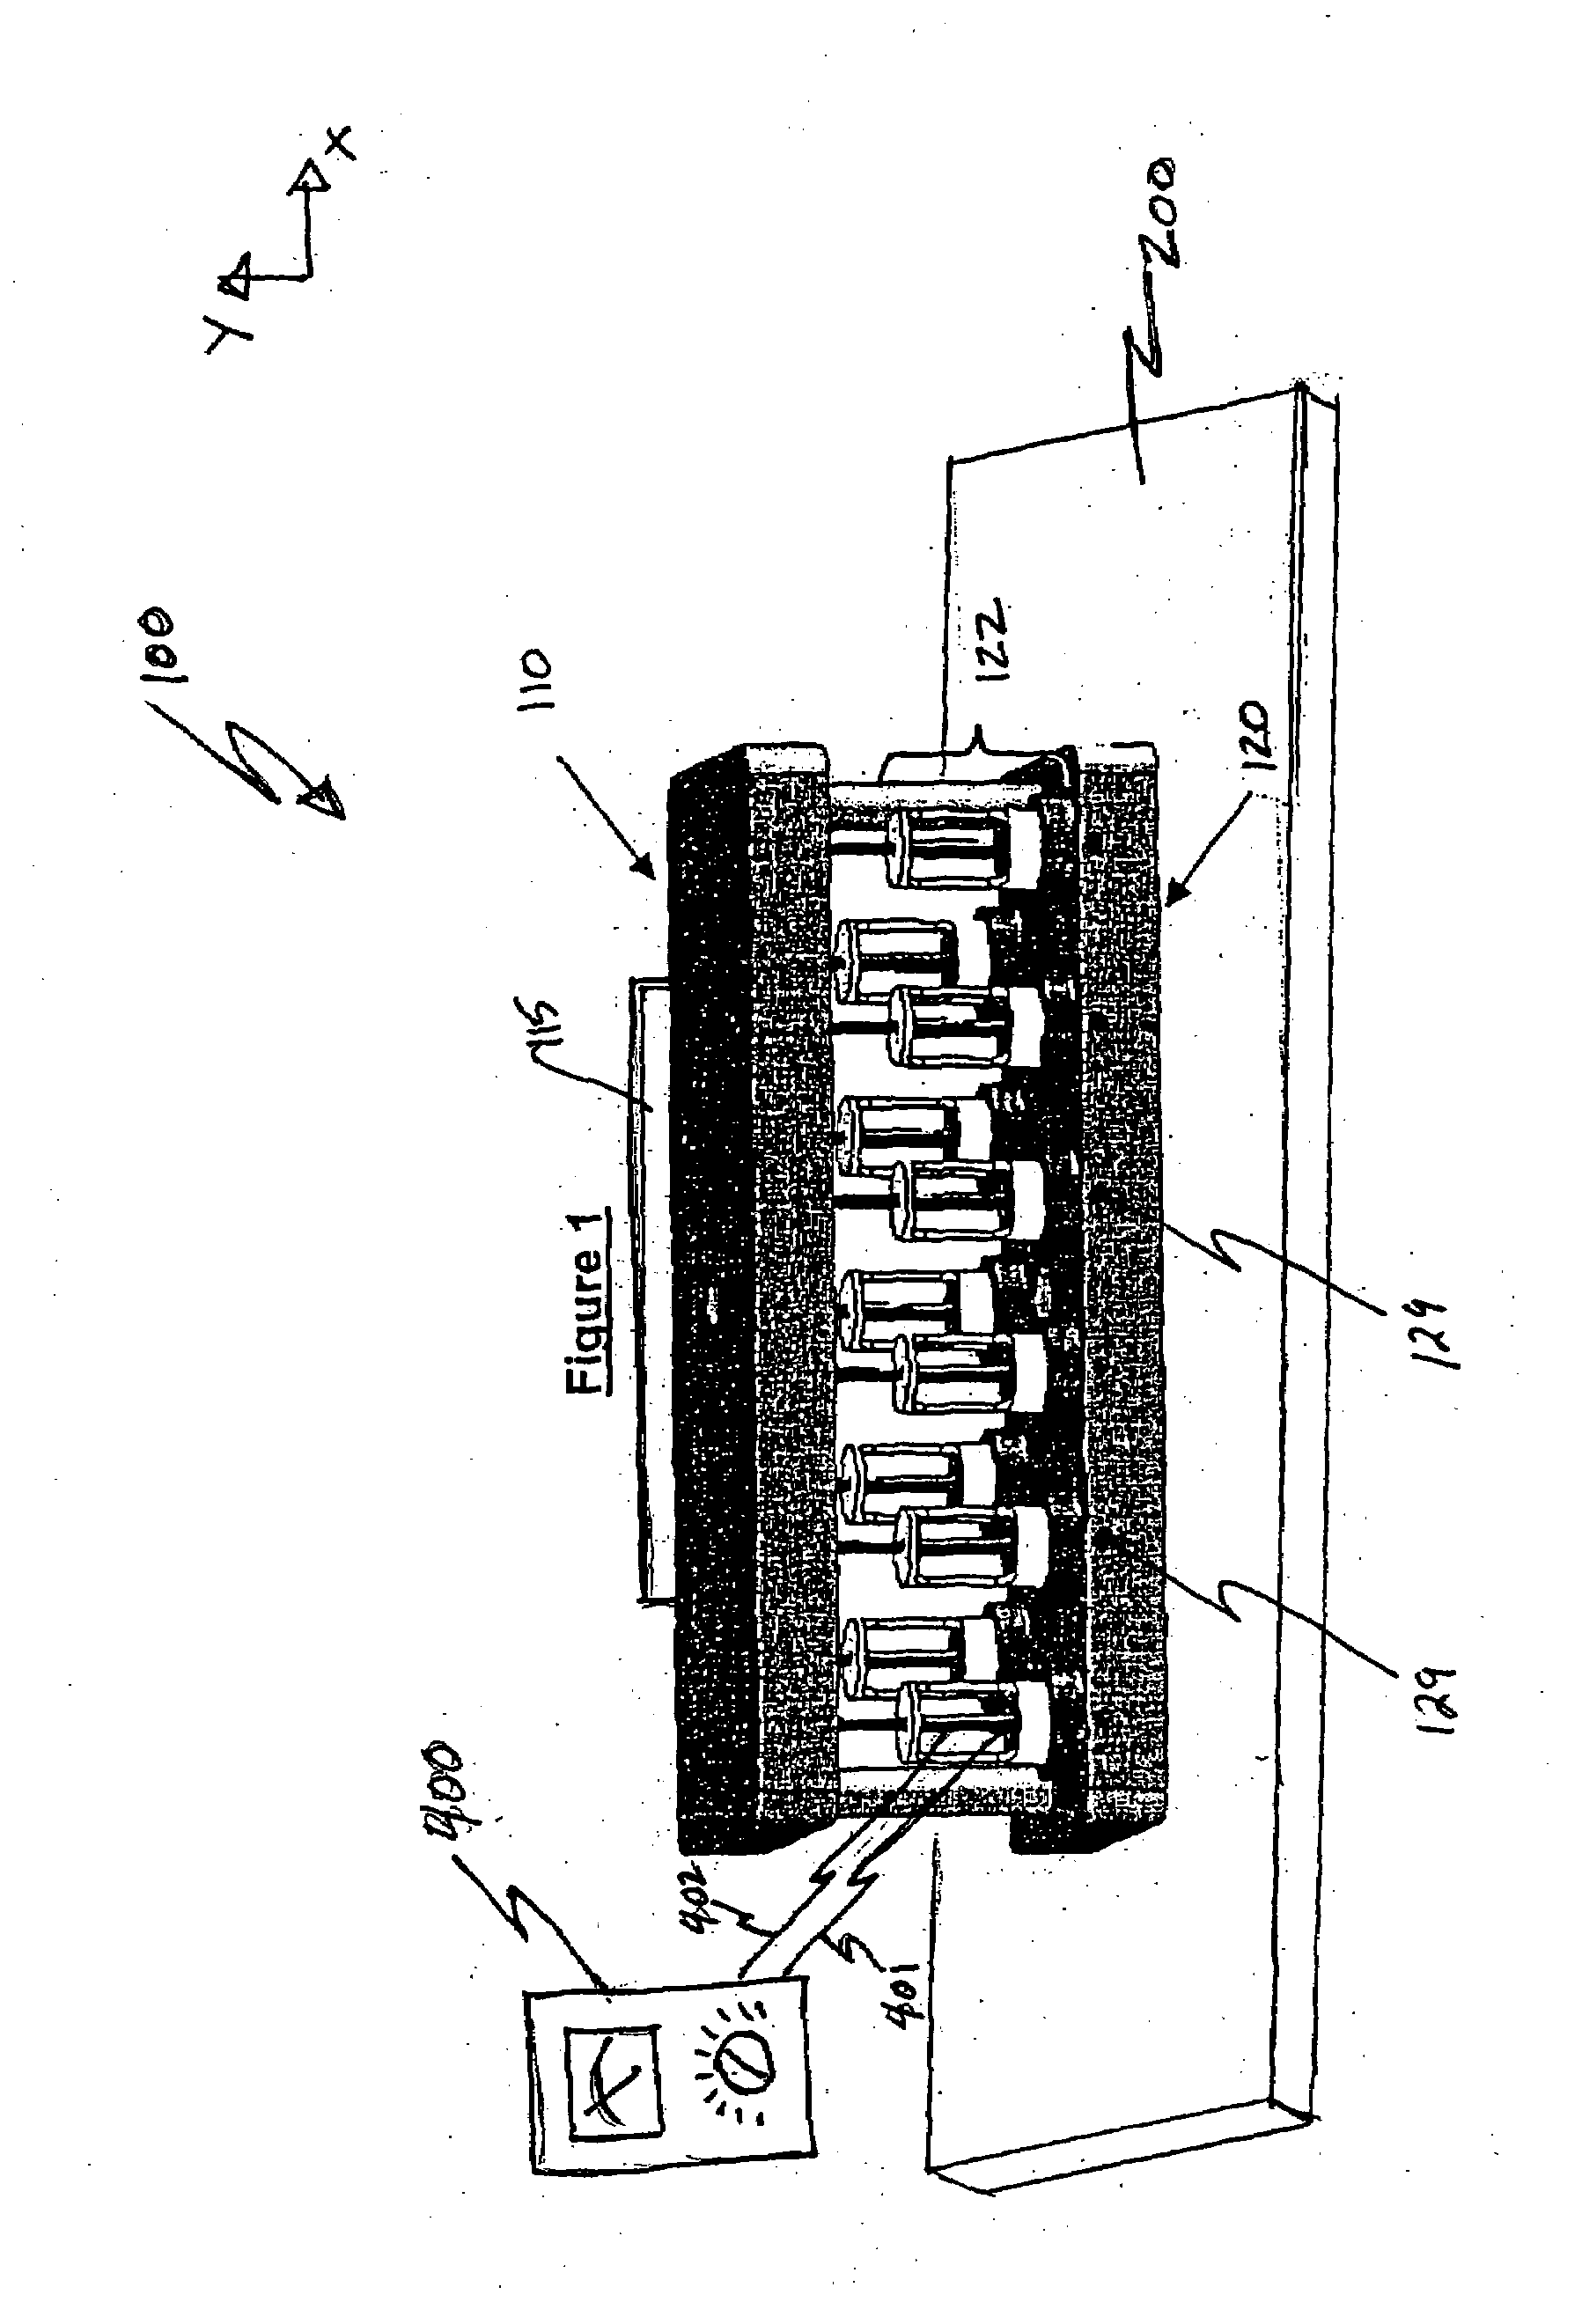 Systems and methods for fatigue testing stents